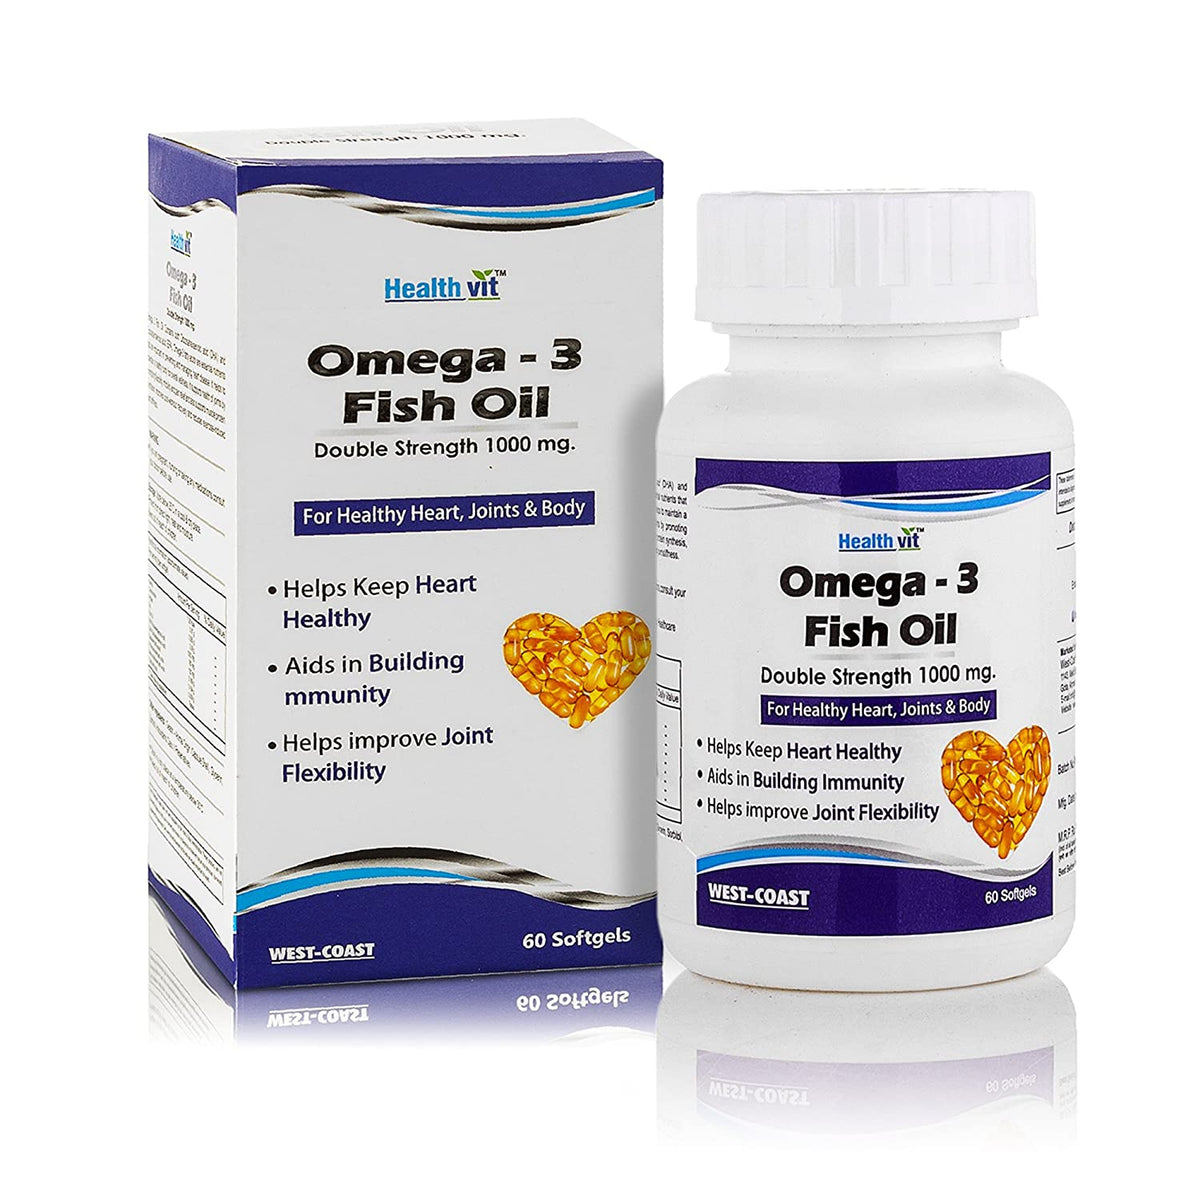 Healthvit Omega 3 Fish Oil Double Strength (EPA & DHA) 1000mg 60 Softgels for Healthy Heart, Joints & Body Omega-3